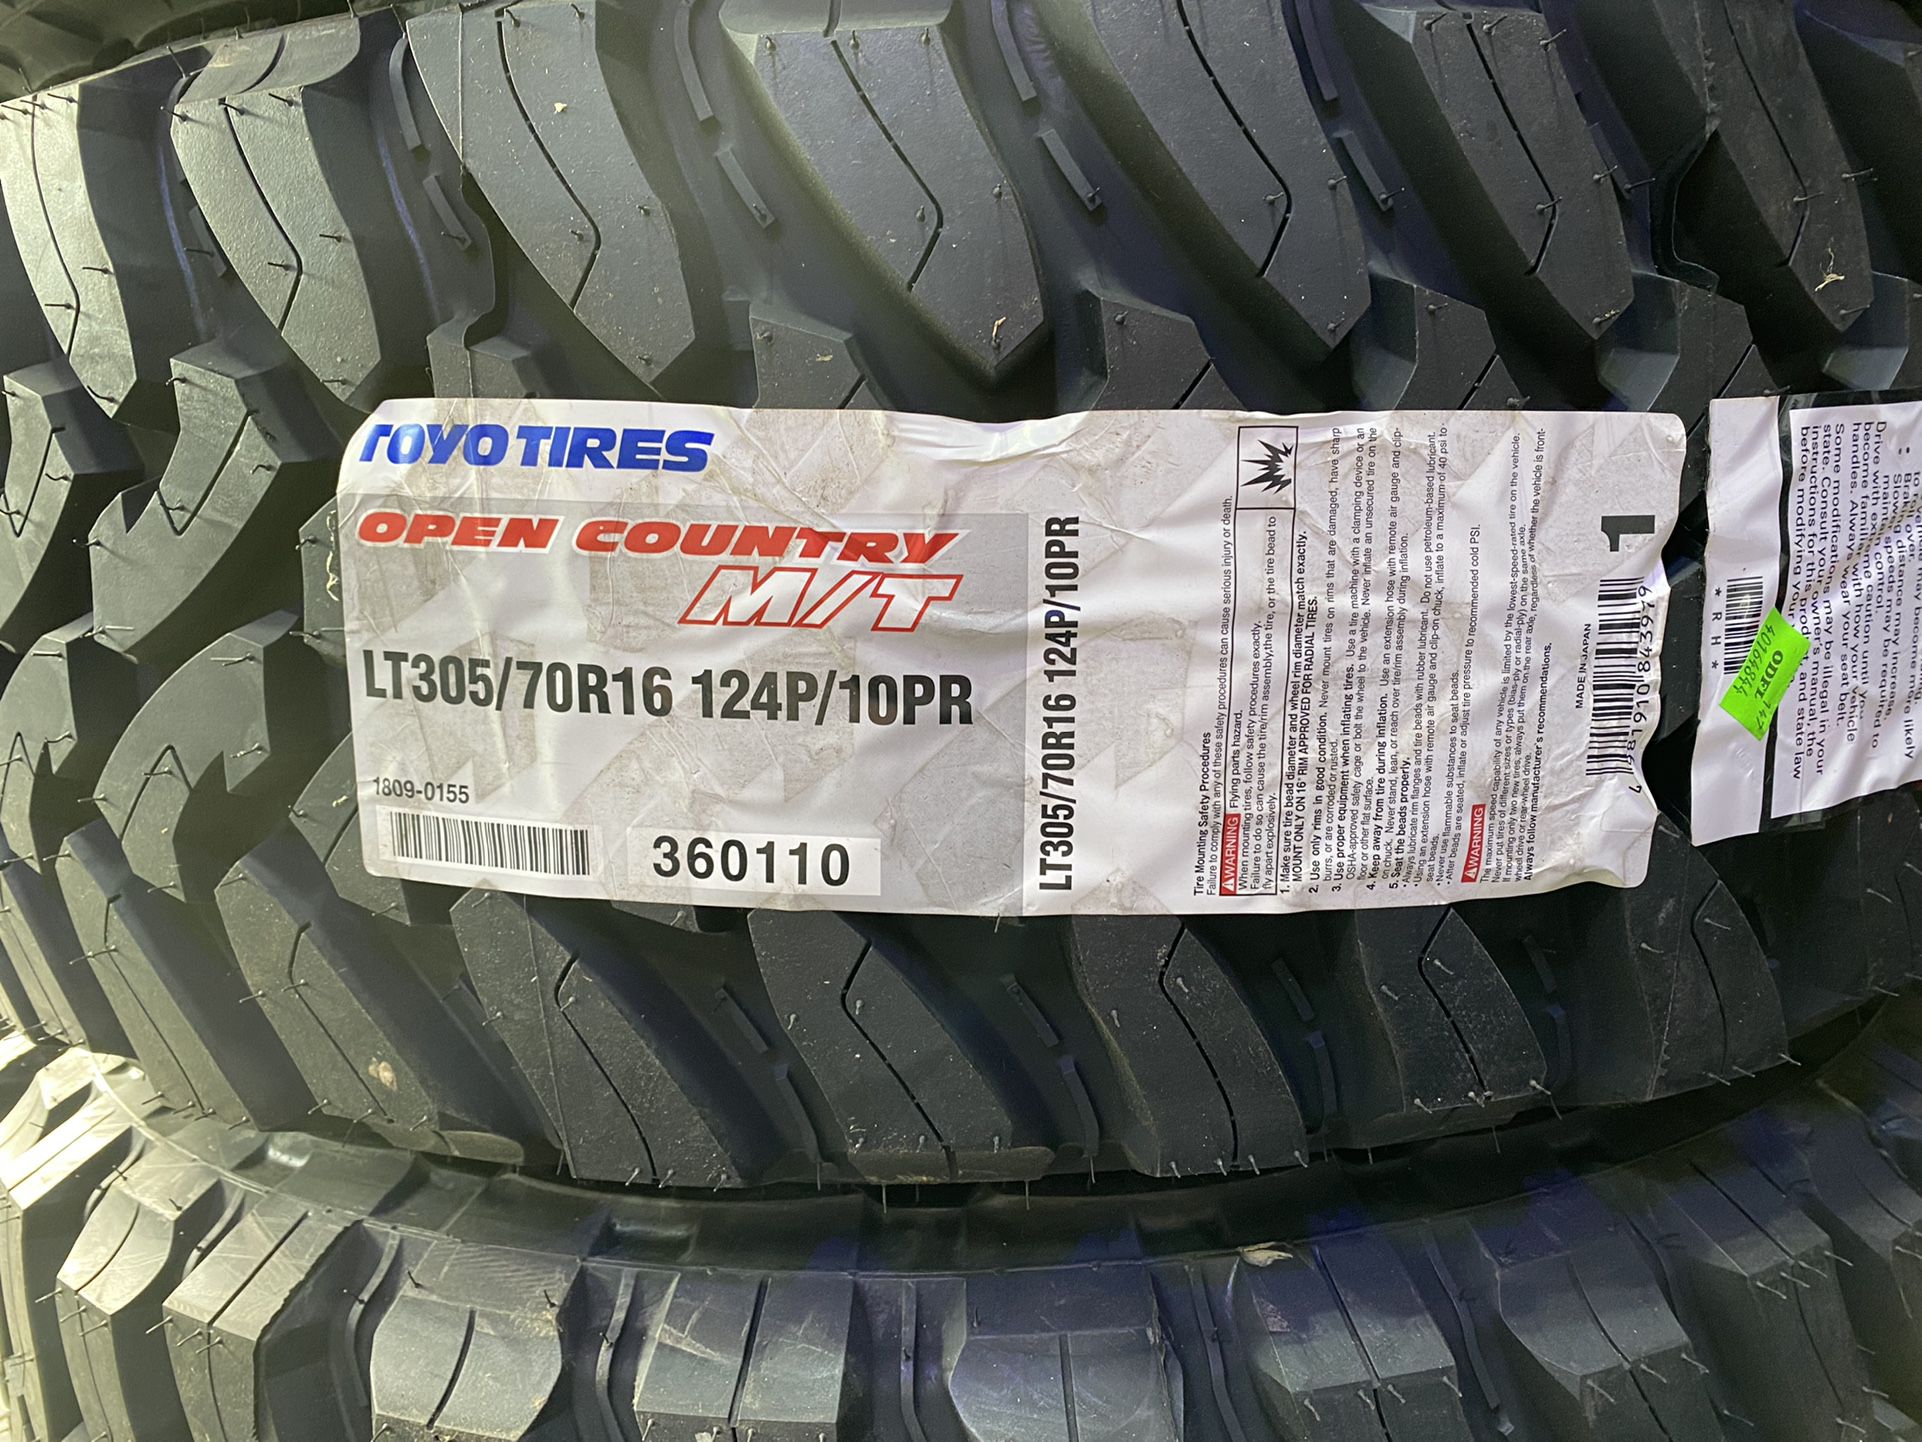 Toyo Tire Open Country M/T Mud-Terrain Tires (2) 305/70R16 (2) 255/85R16 NEW Staggered 33"